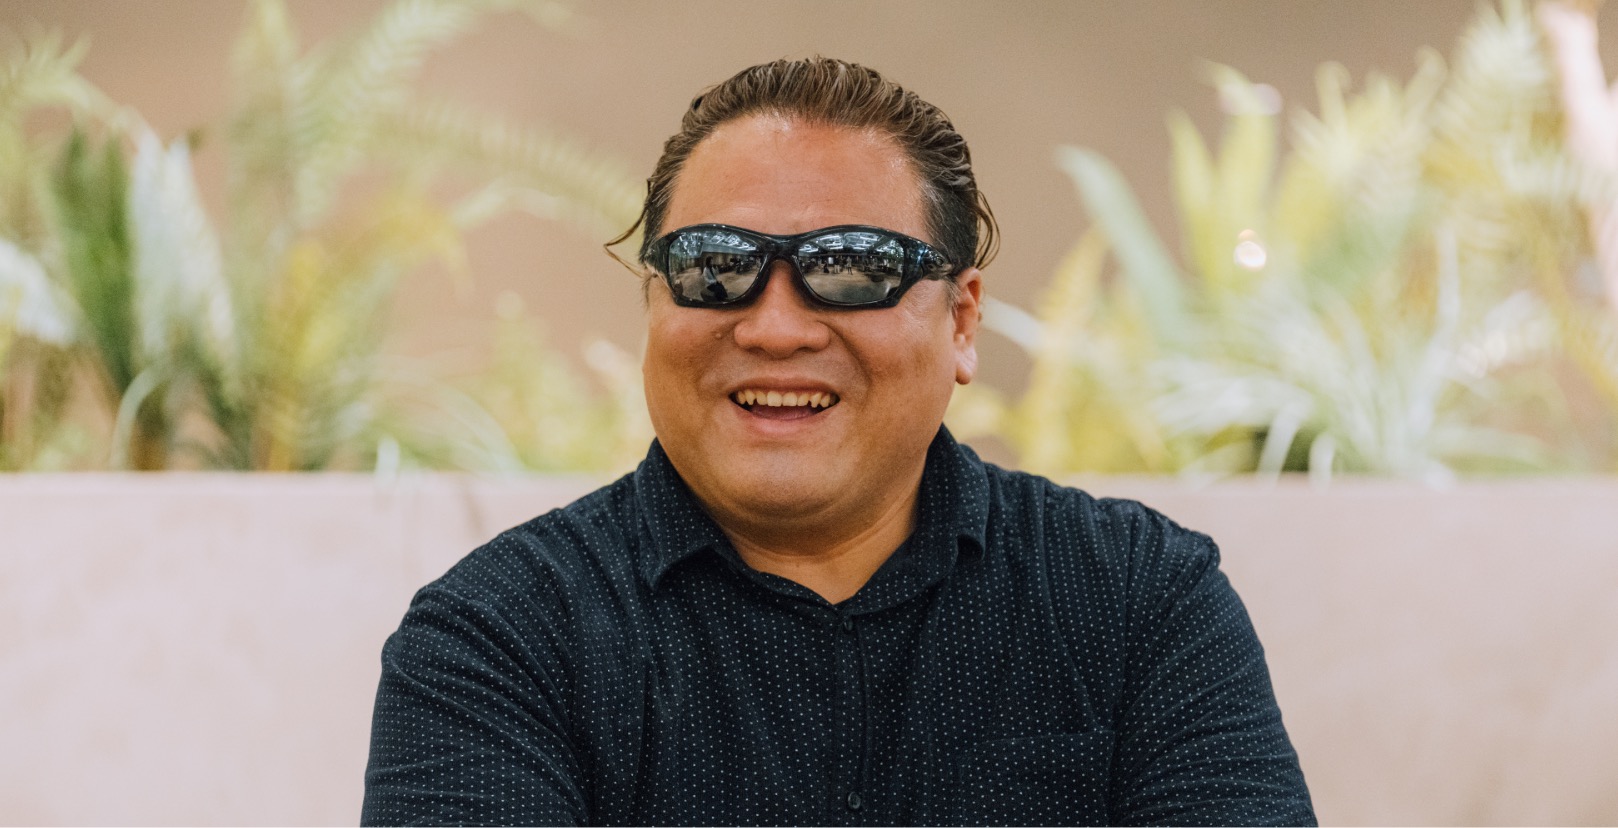 A male with sunglasses talking and smiling.